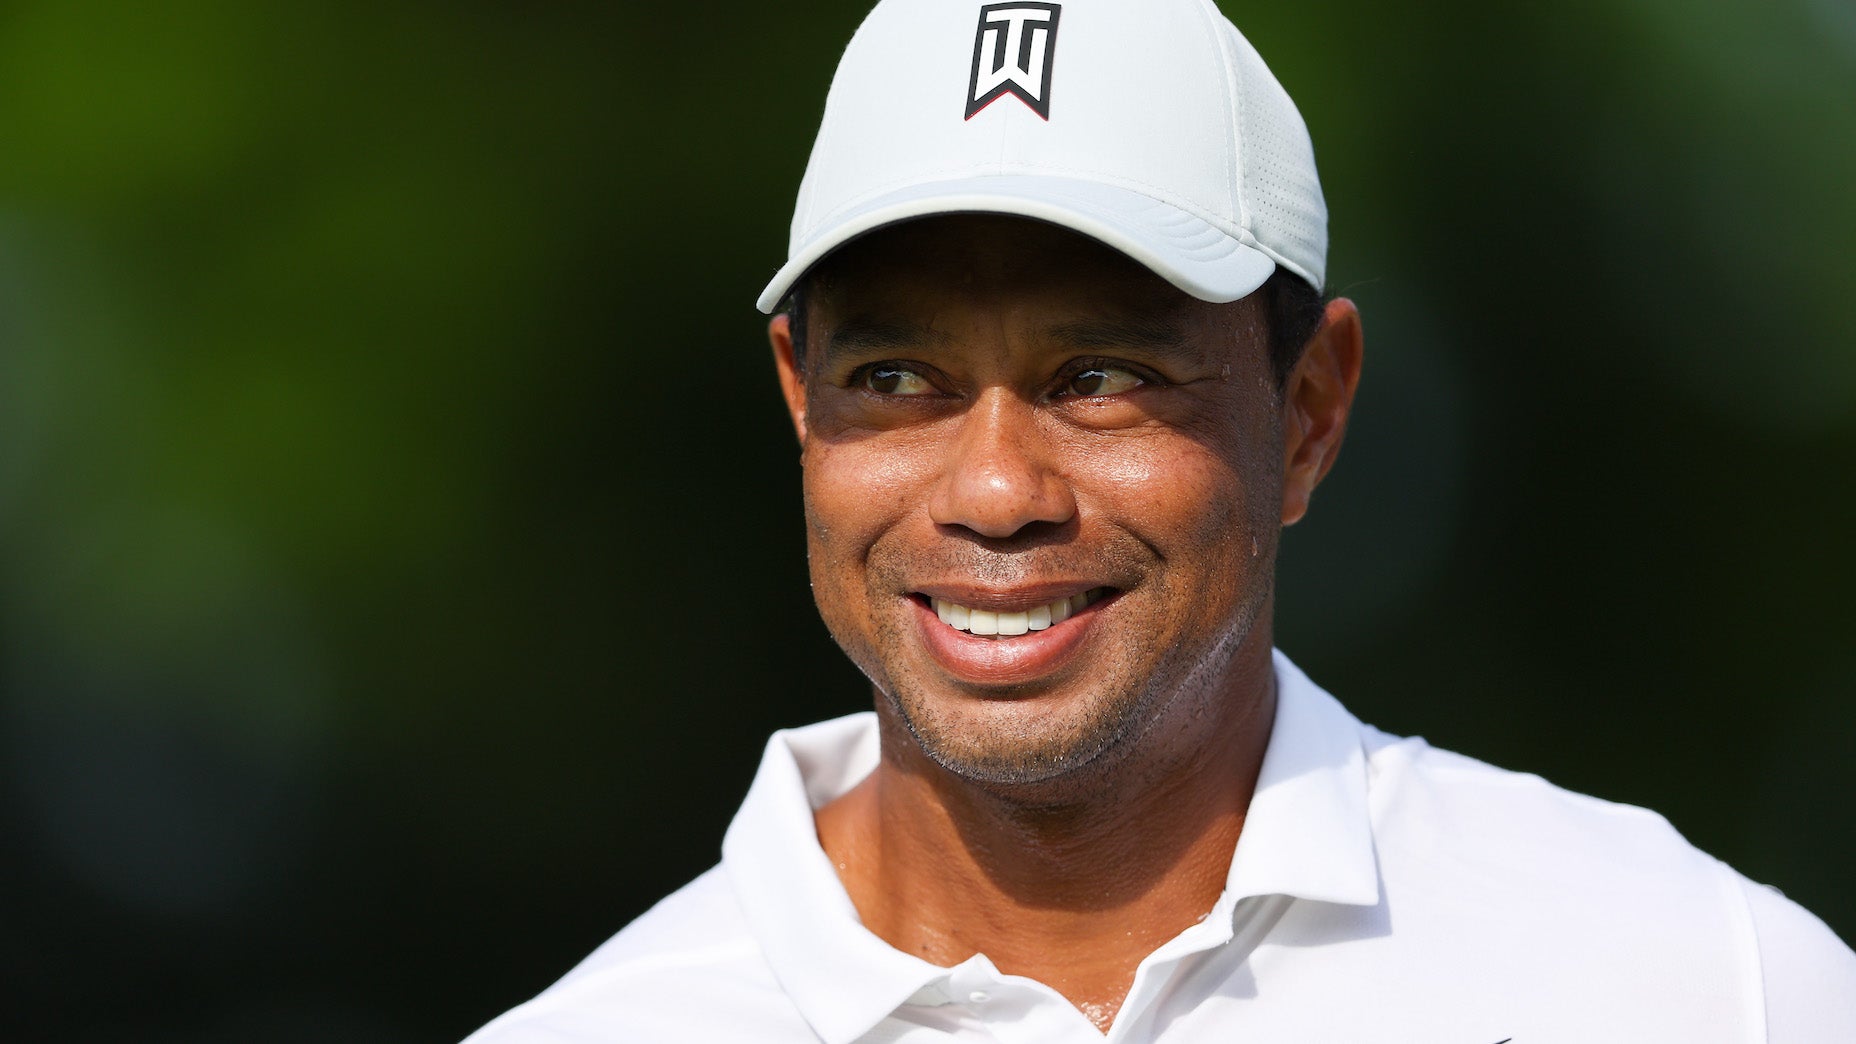 The 'mind-blowingly enormous' offer Tiger Woods declined to join